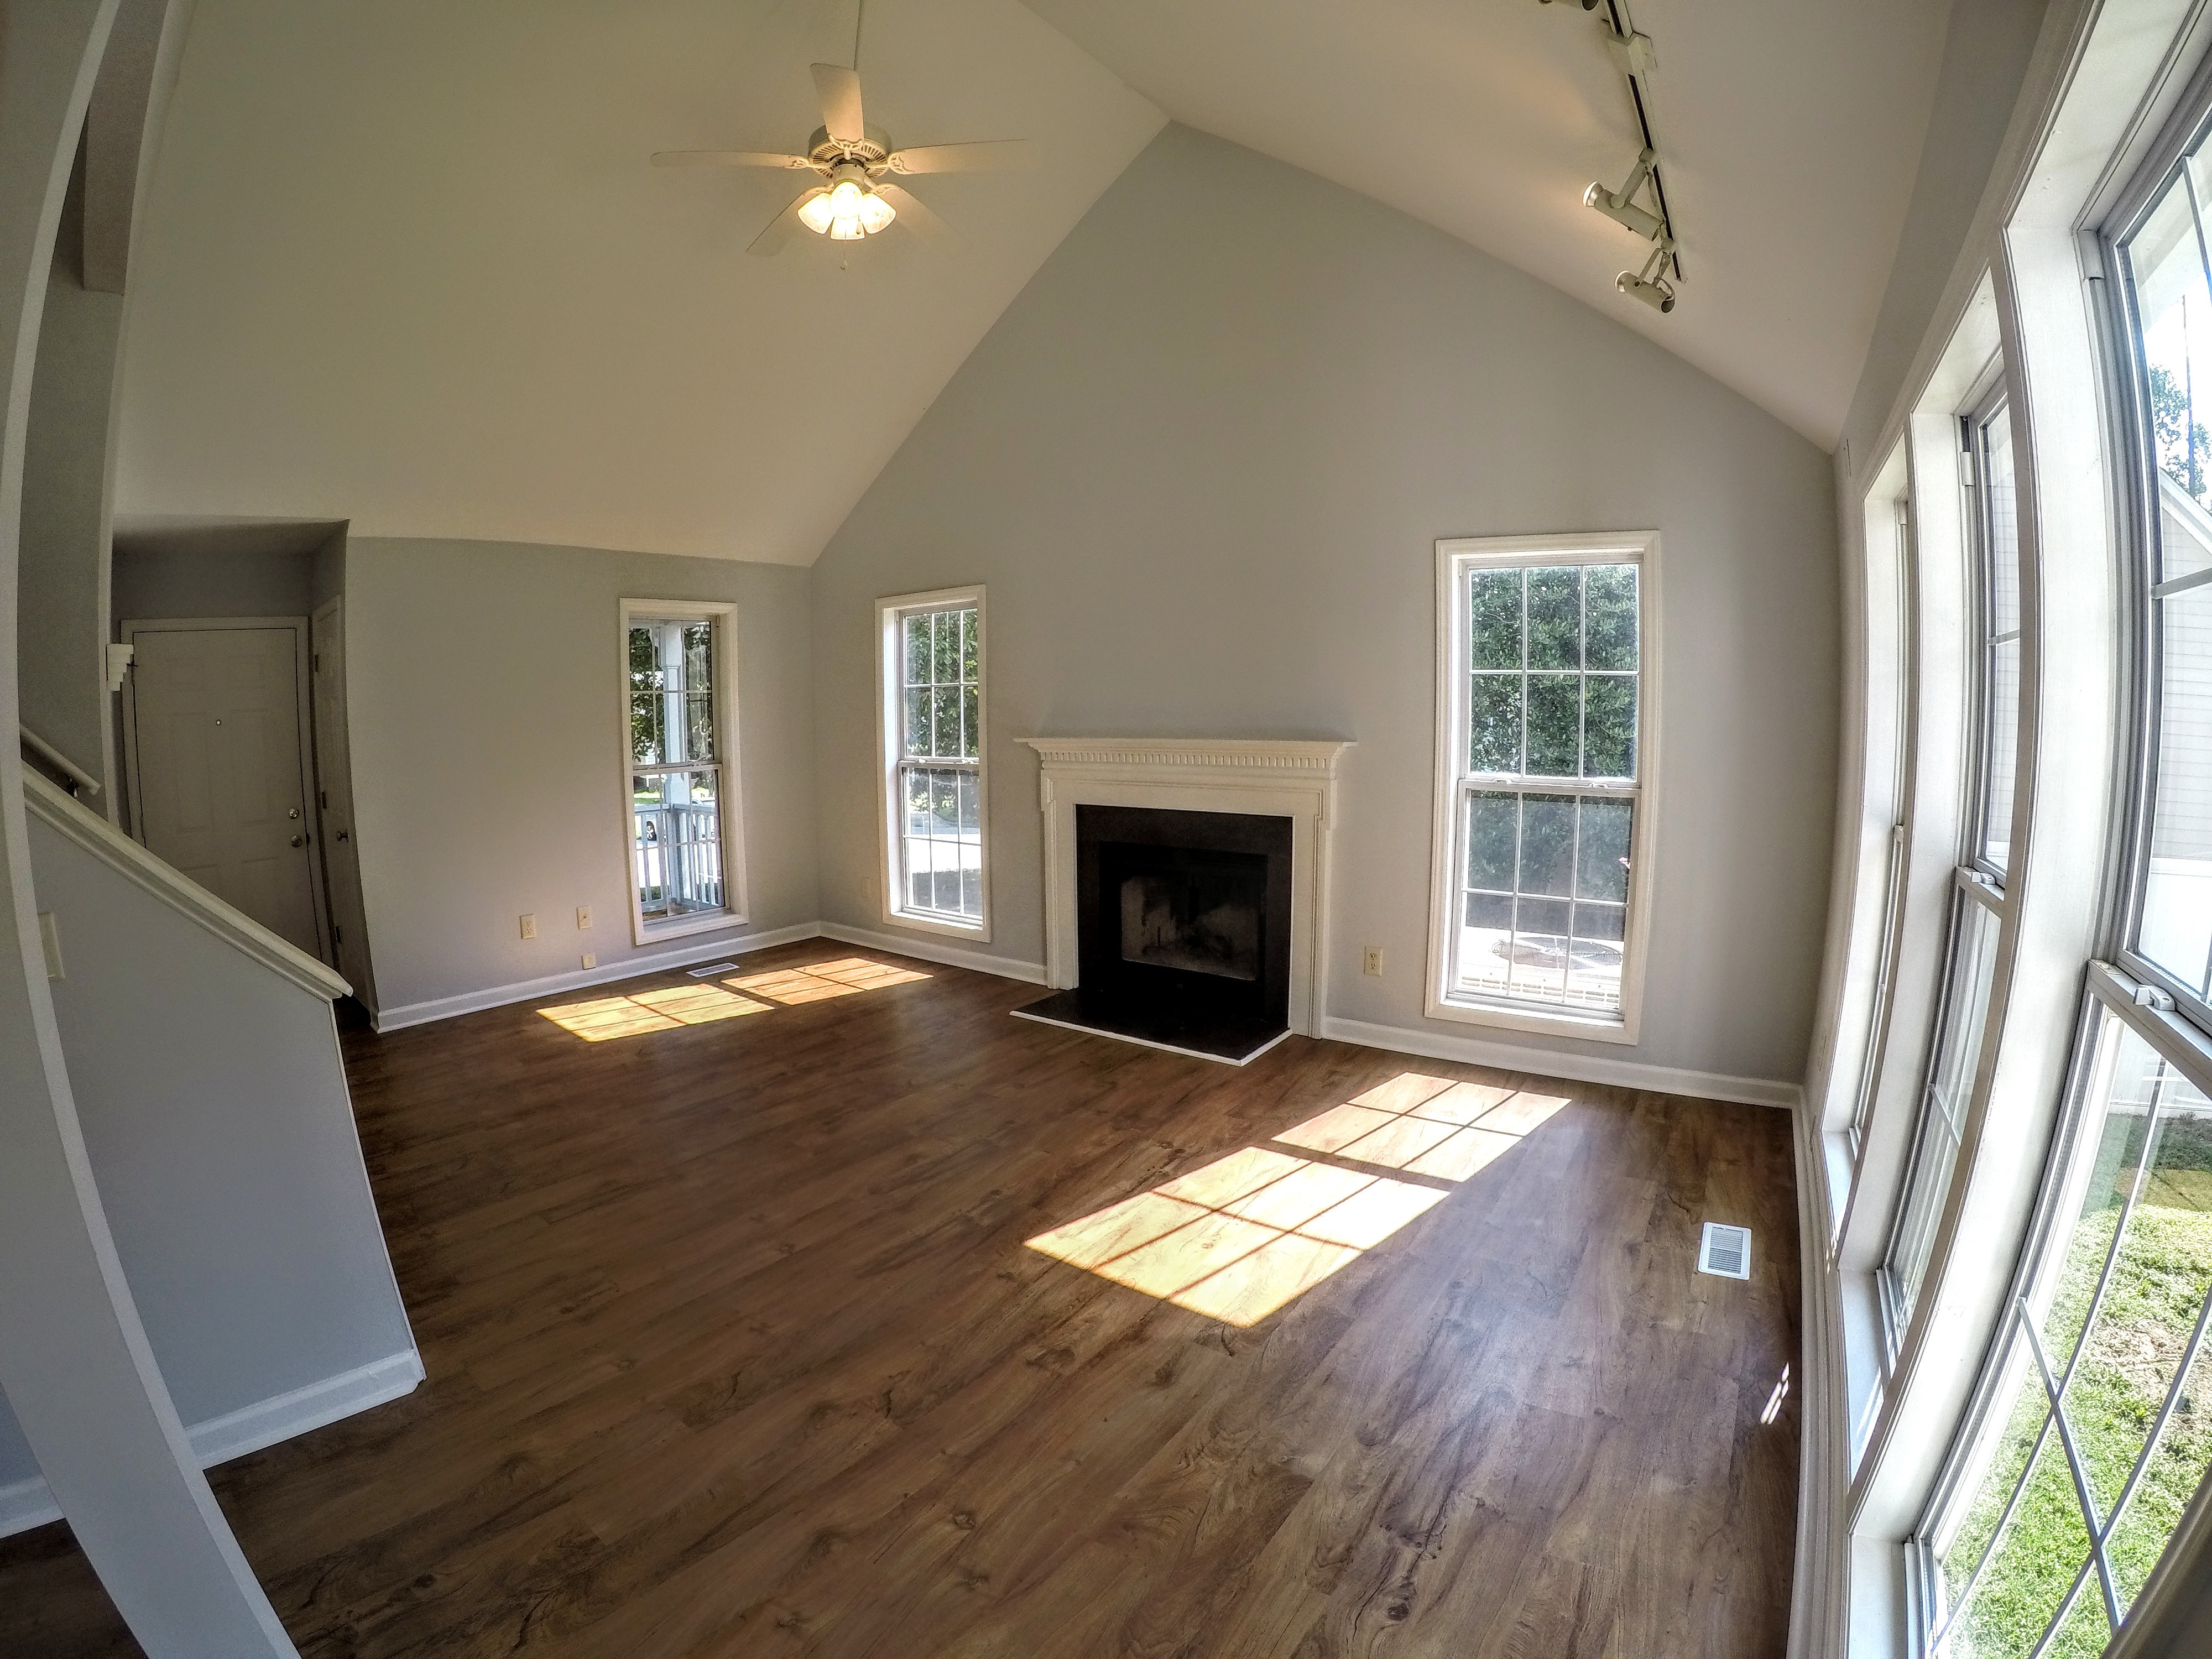 Hardwood Flooring Clayton Nc Of 1809 Betry Pl Raleigh Nc 27603 Realestate Com In isyb7l1df691z50000000000